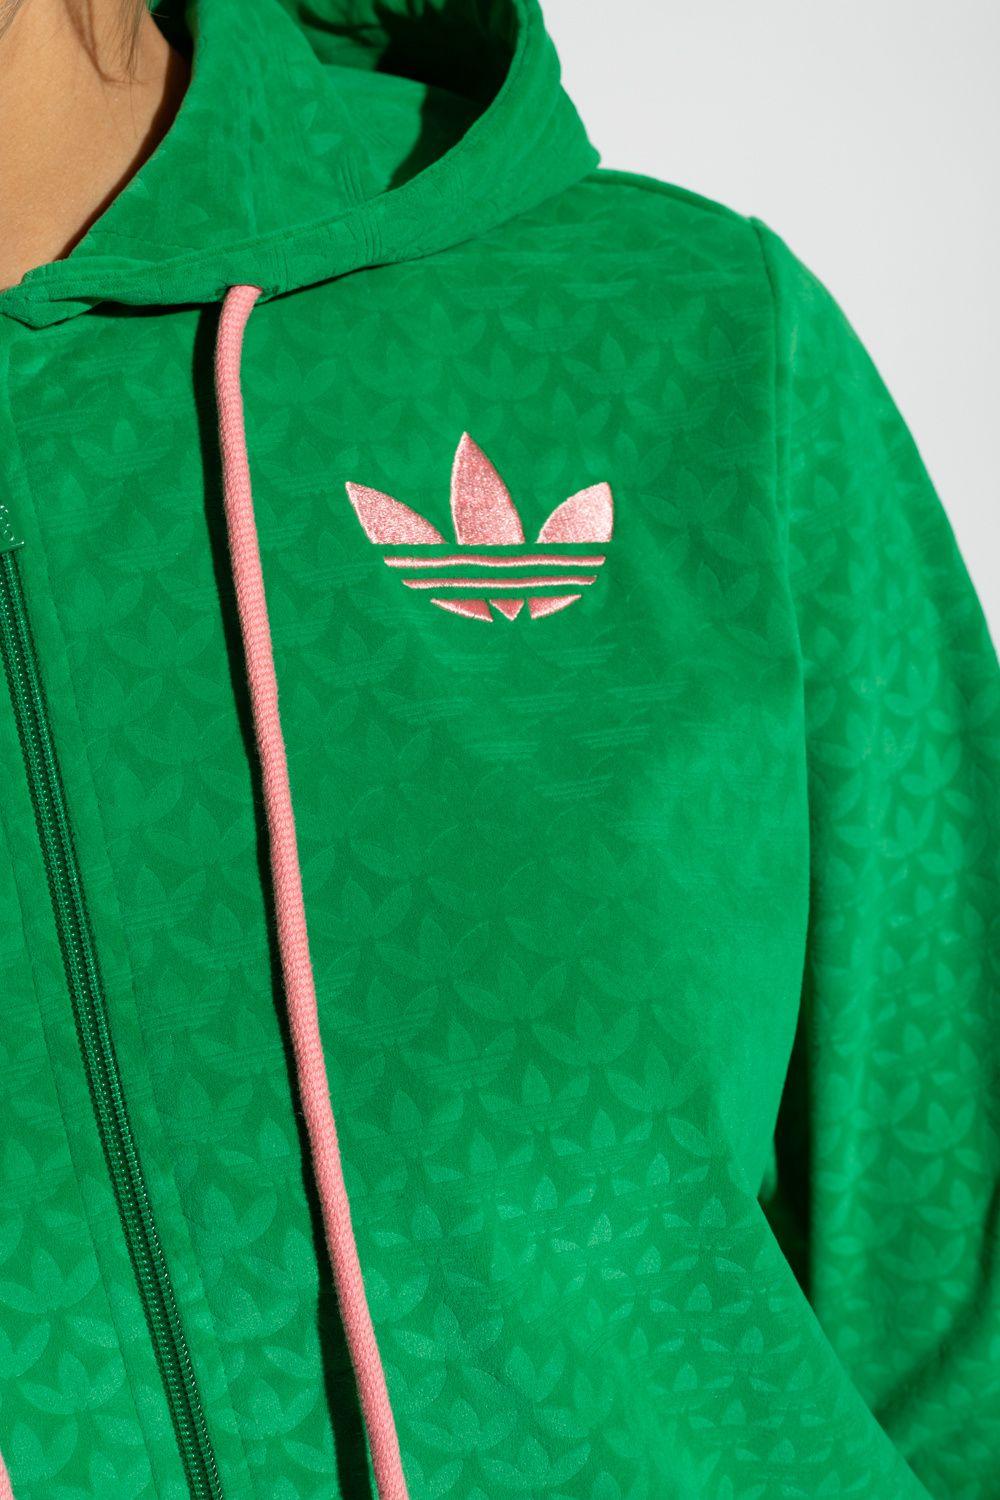 adidas Originals Hoodie With Logo in Green | Lyst